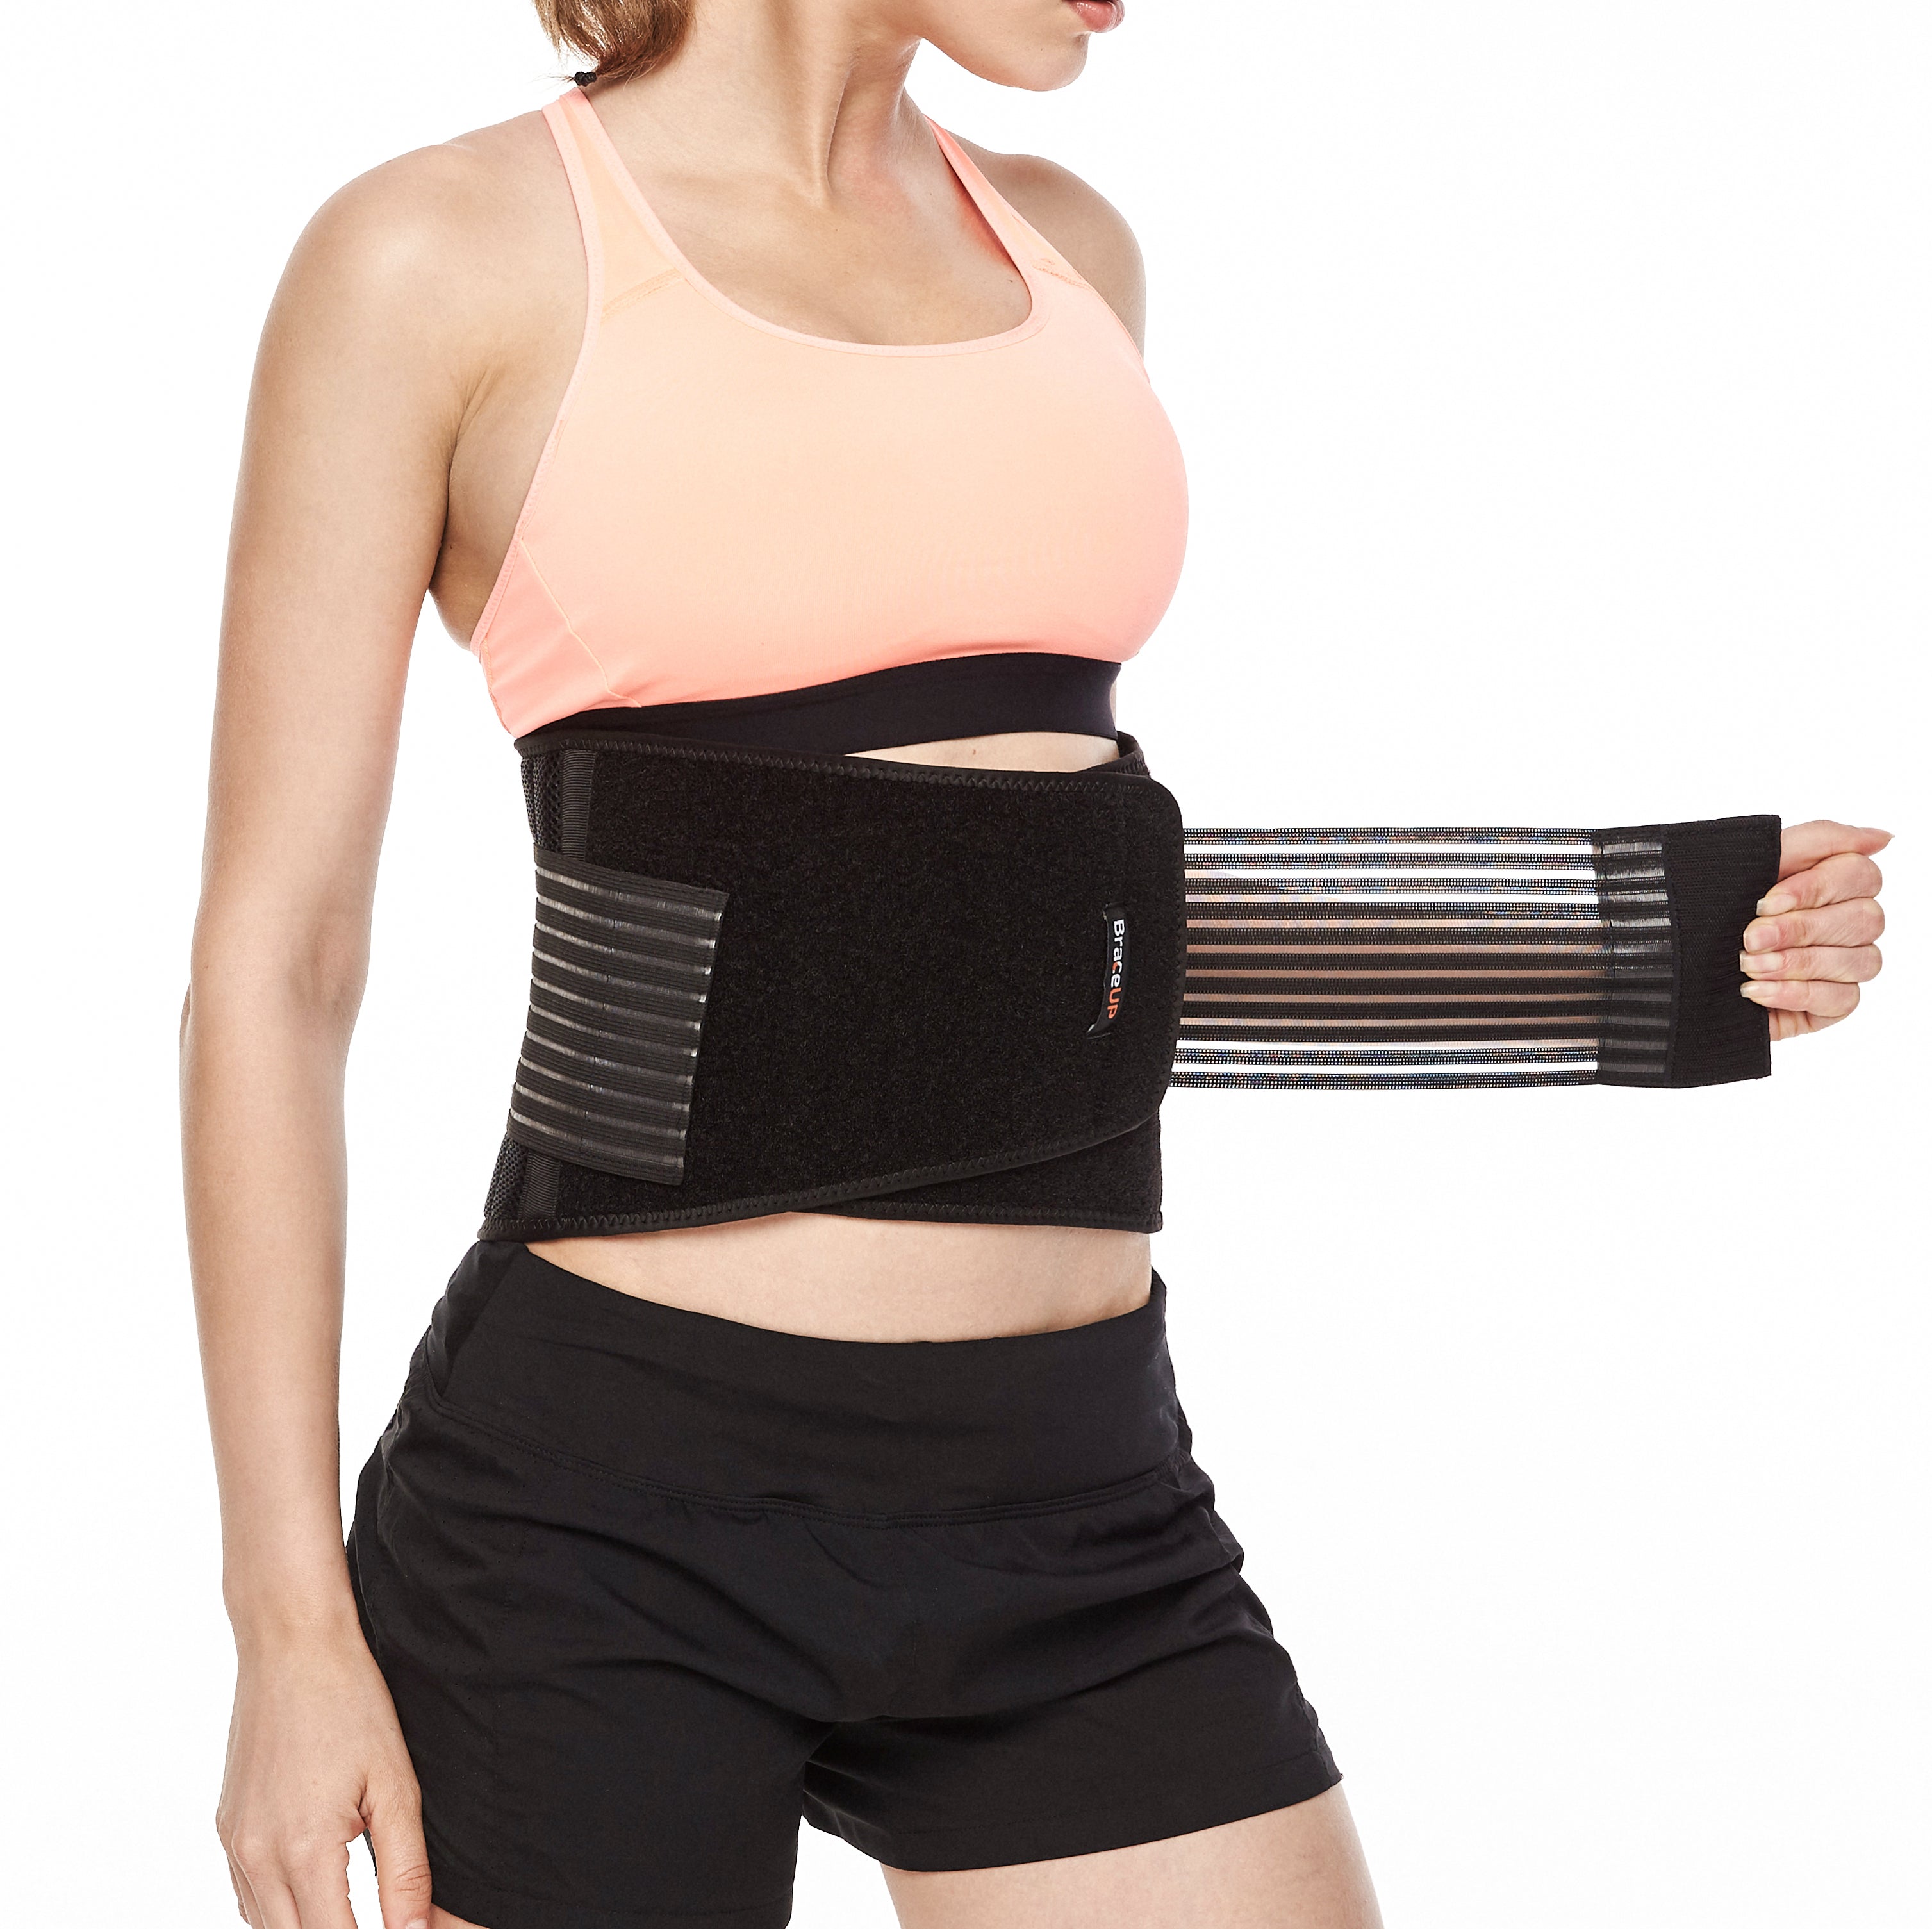 Back Brace by BraceUP for Men and Women - Breathable Waist Lumbar Lower  Back Support Belt for Sciatica, Herniated Disc, Scoliosis Back Pain Relief,  Heavy lifting, with Dual Adjustable Straps (L/XL) Large/X-Large (